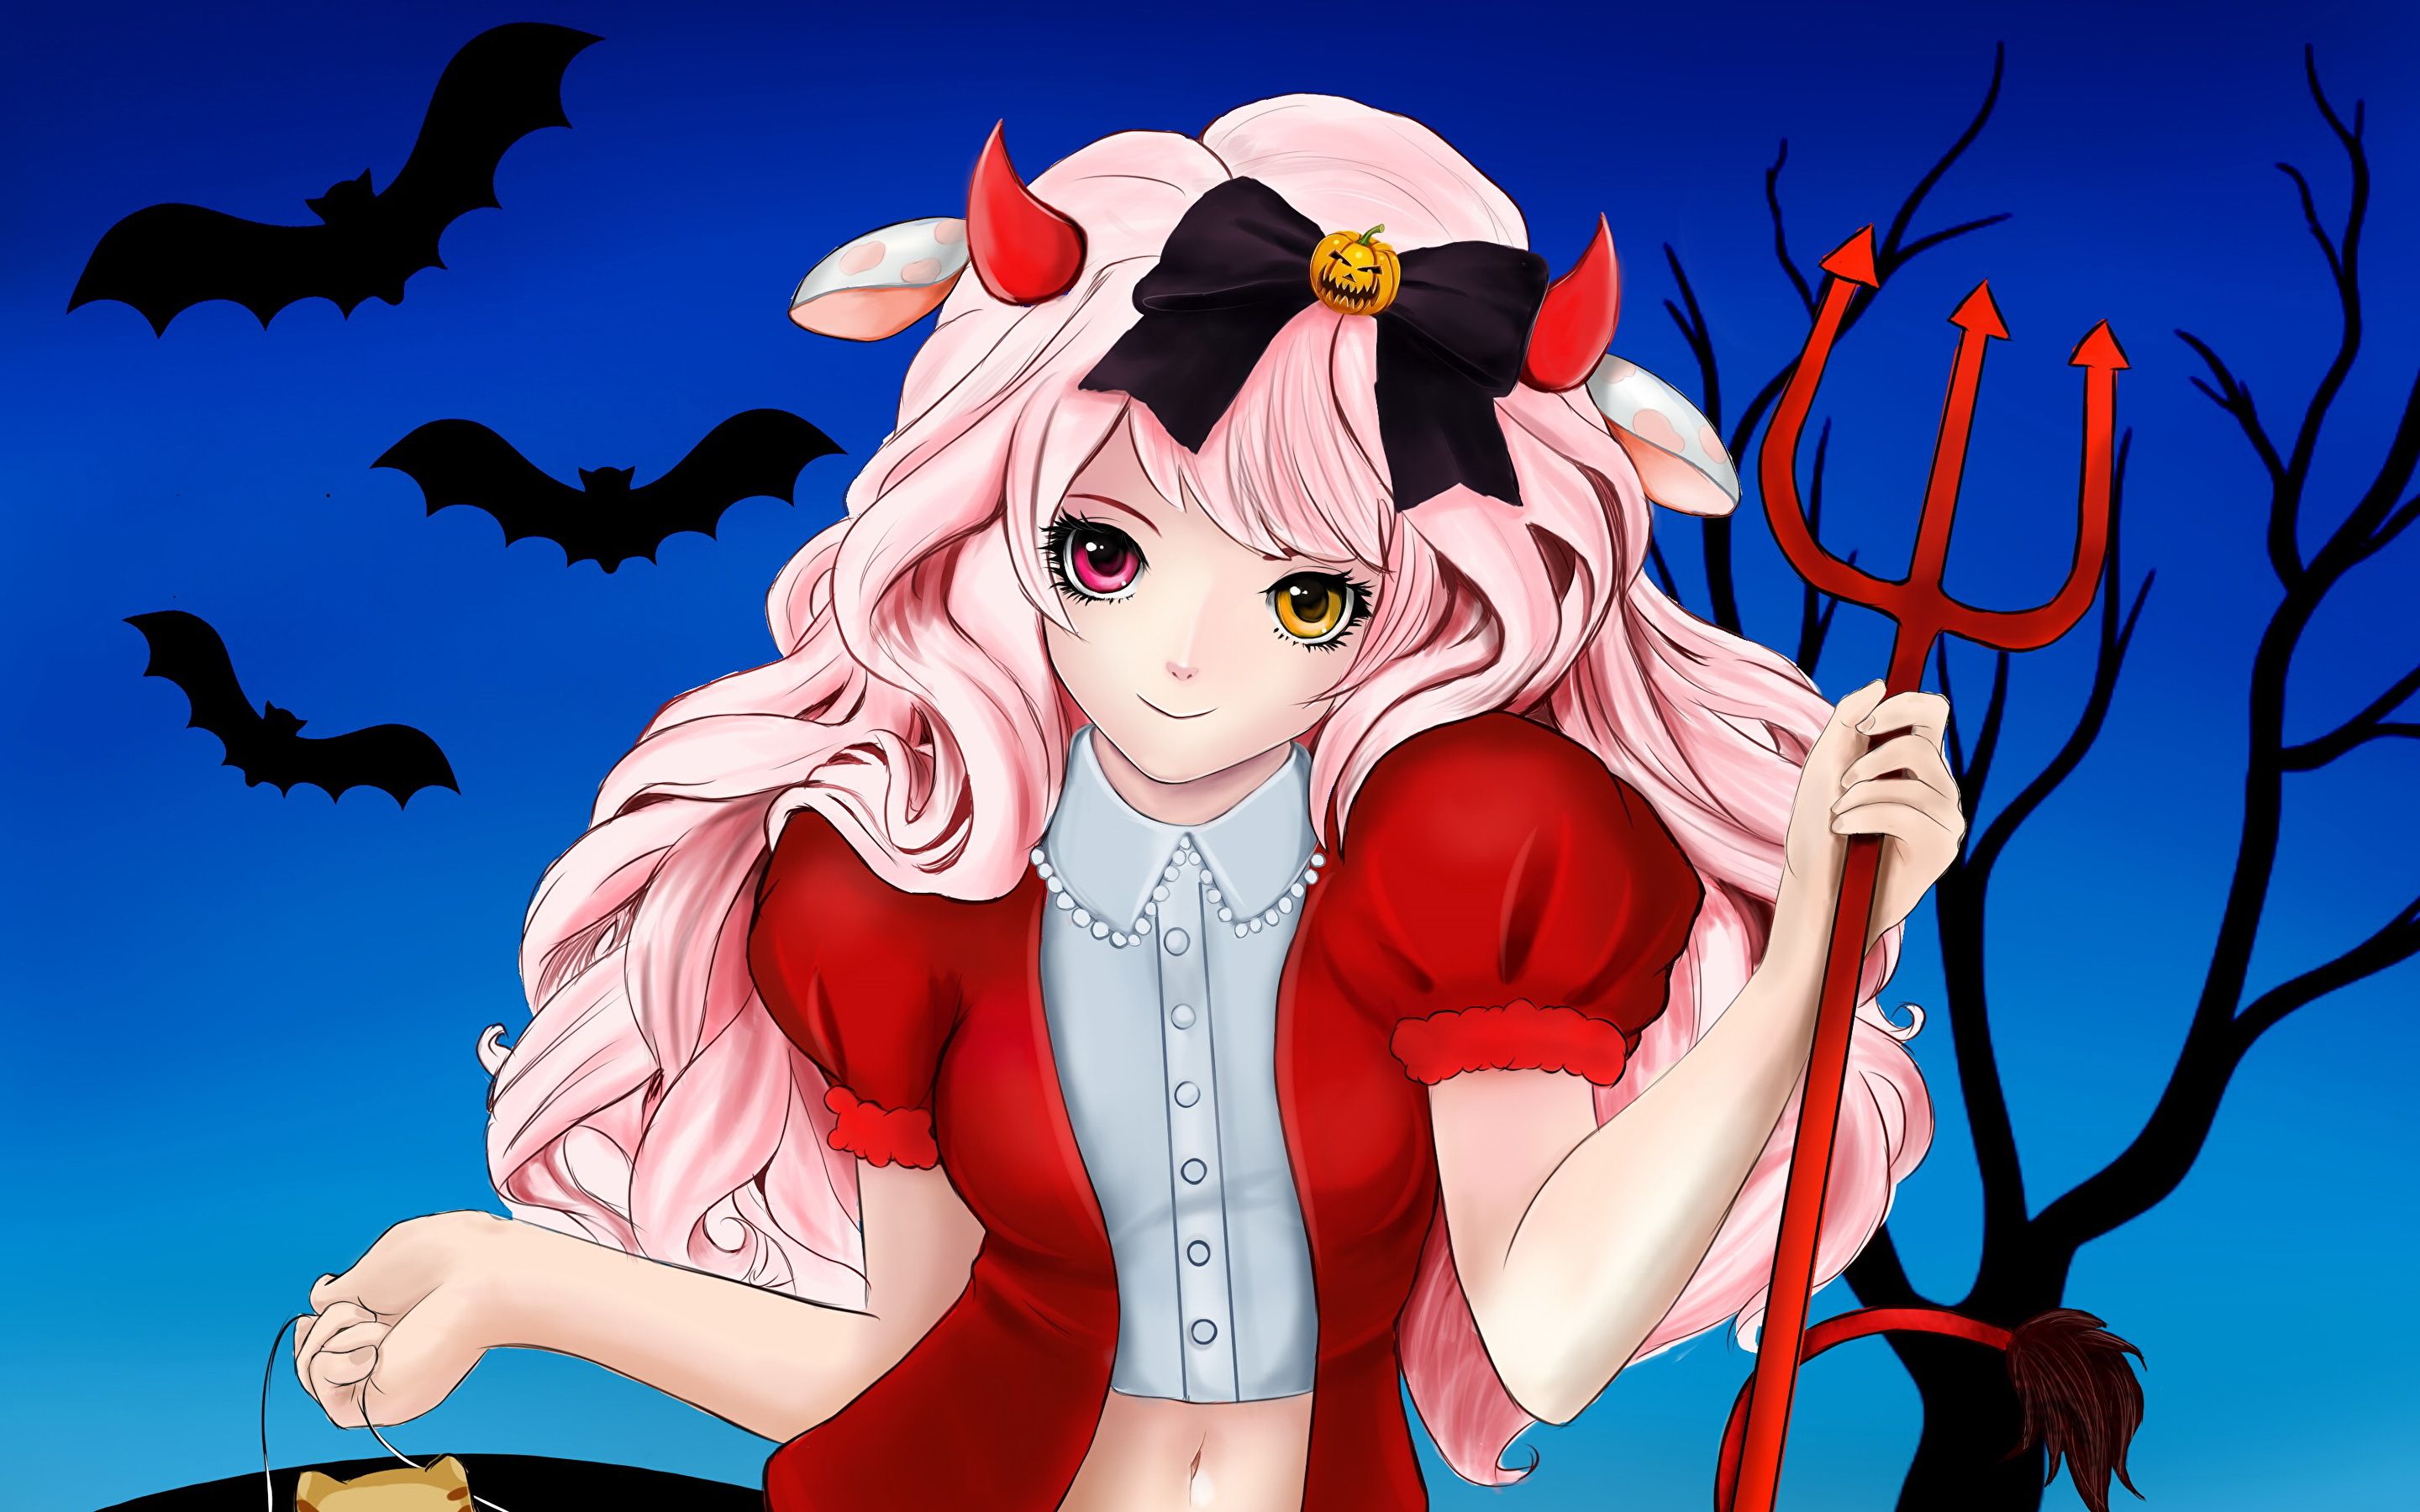 Anime girl in a Halloween costume with a pitchfork wallpaper and image, picture, photo